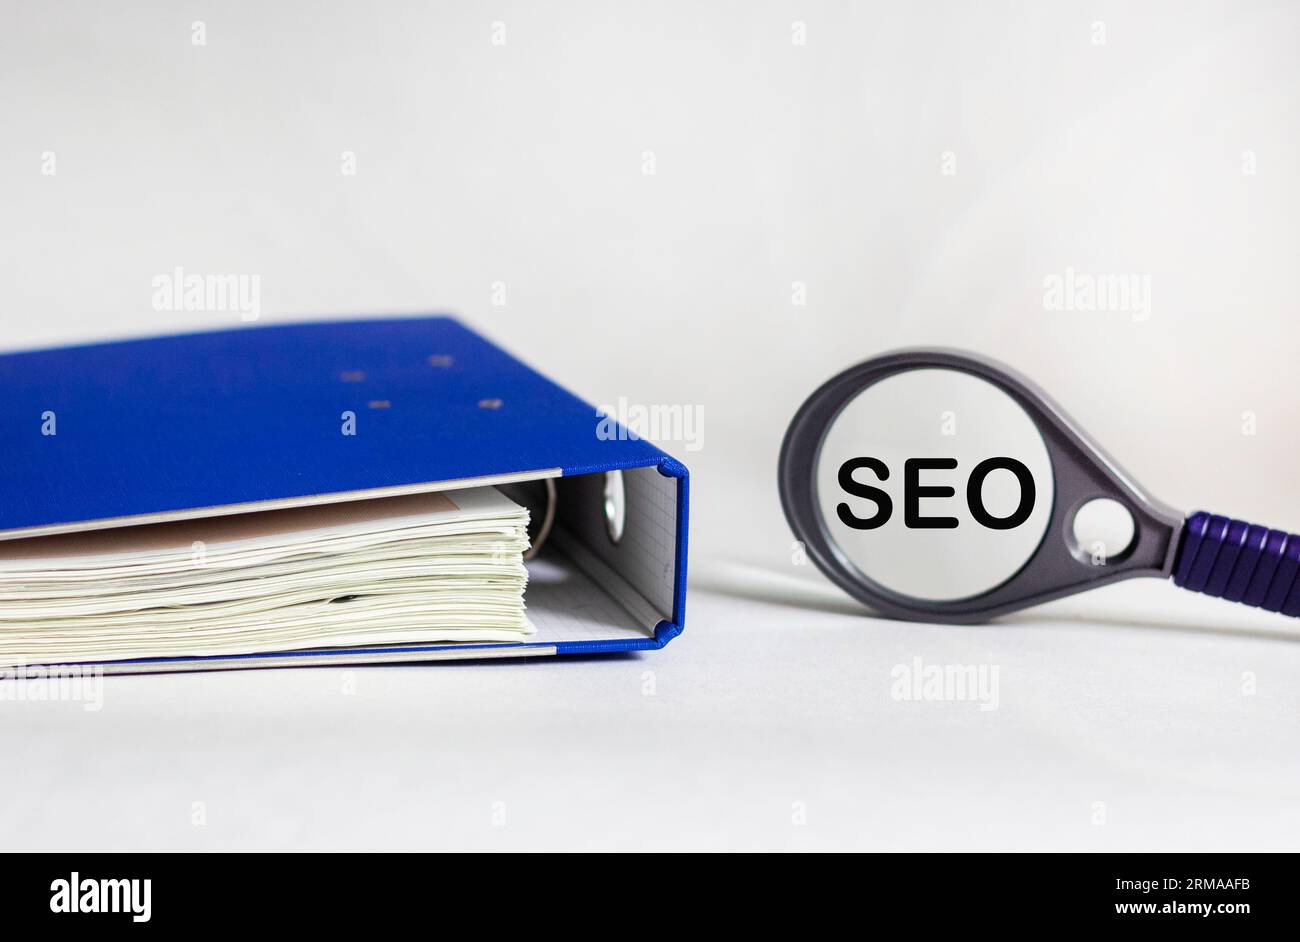 The word SEO written on a magnifying glass and a white background with a blue document folder Stock Photo